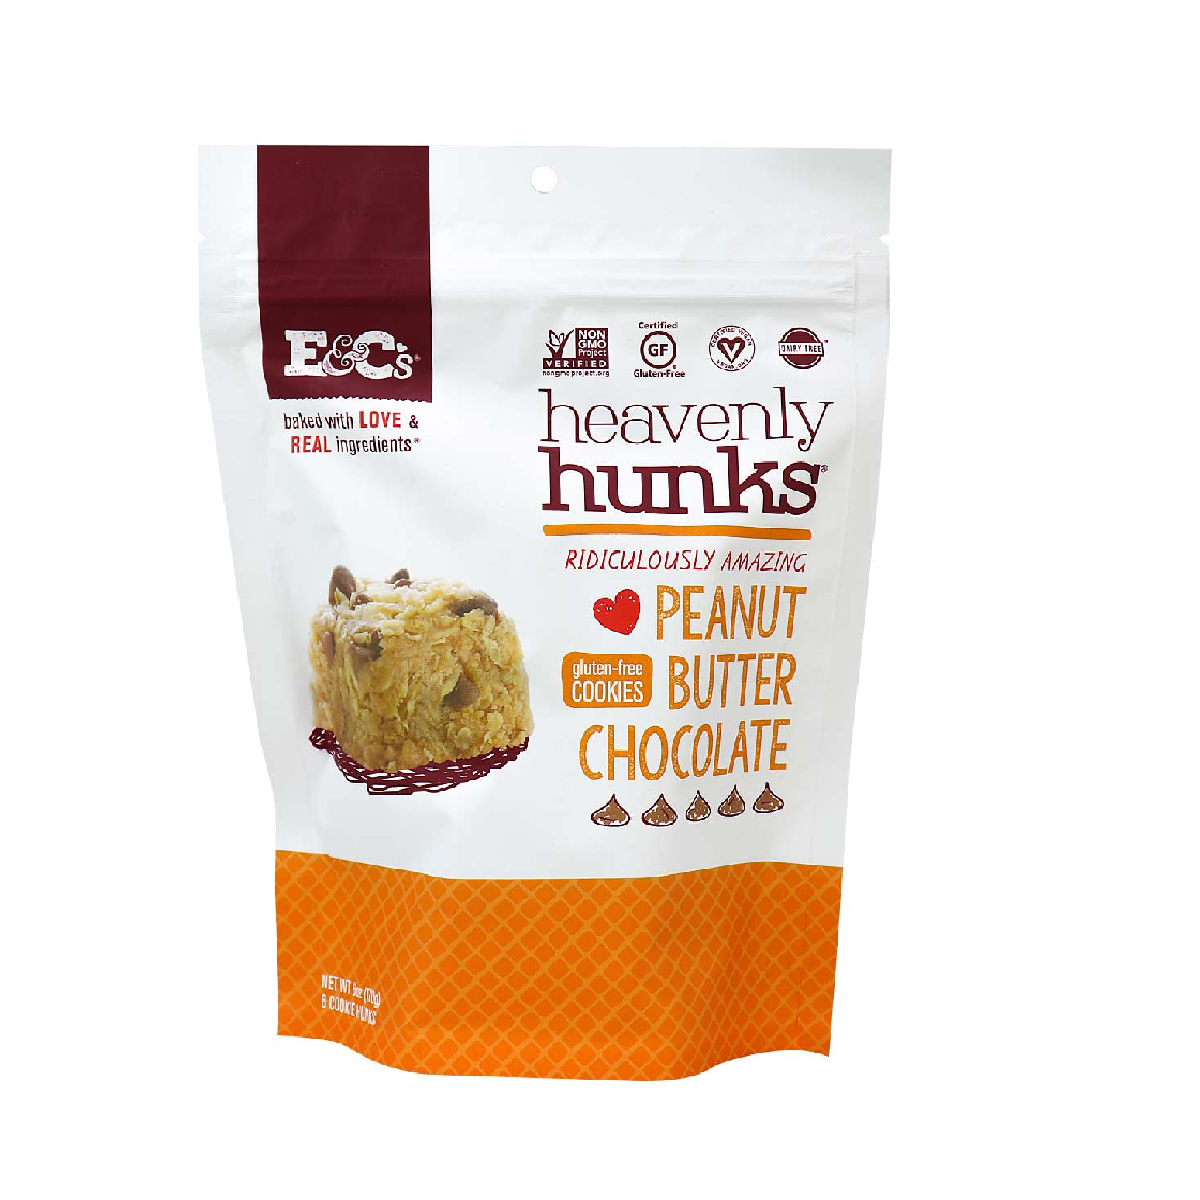 White and orange 200 gram package of Peanut Butter flavoured Heavenly Hunks.